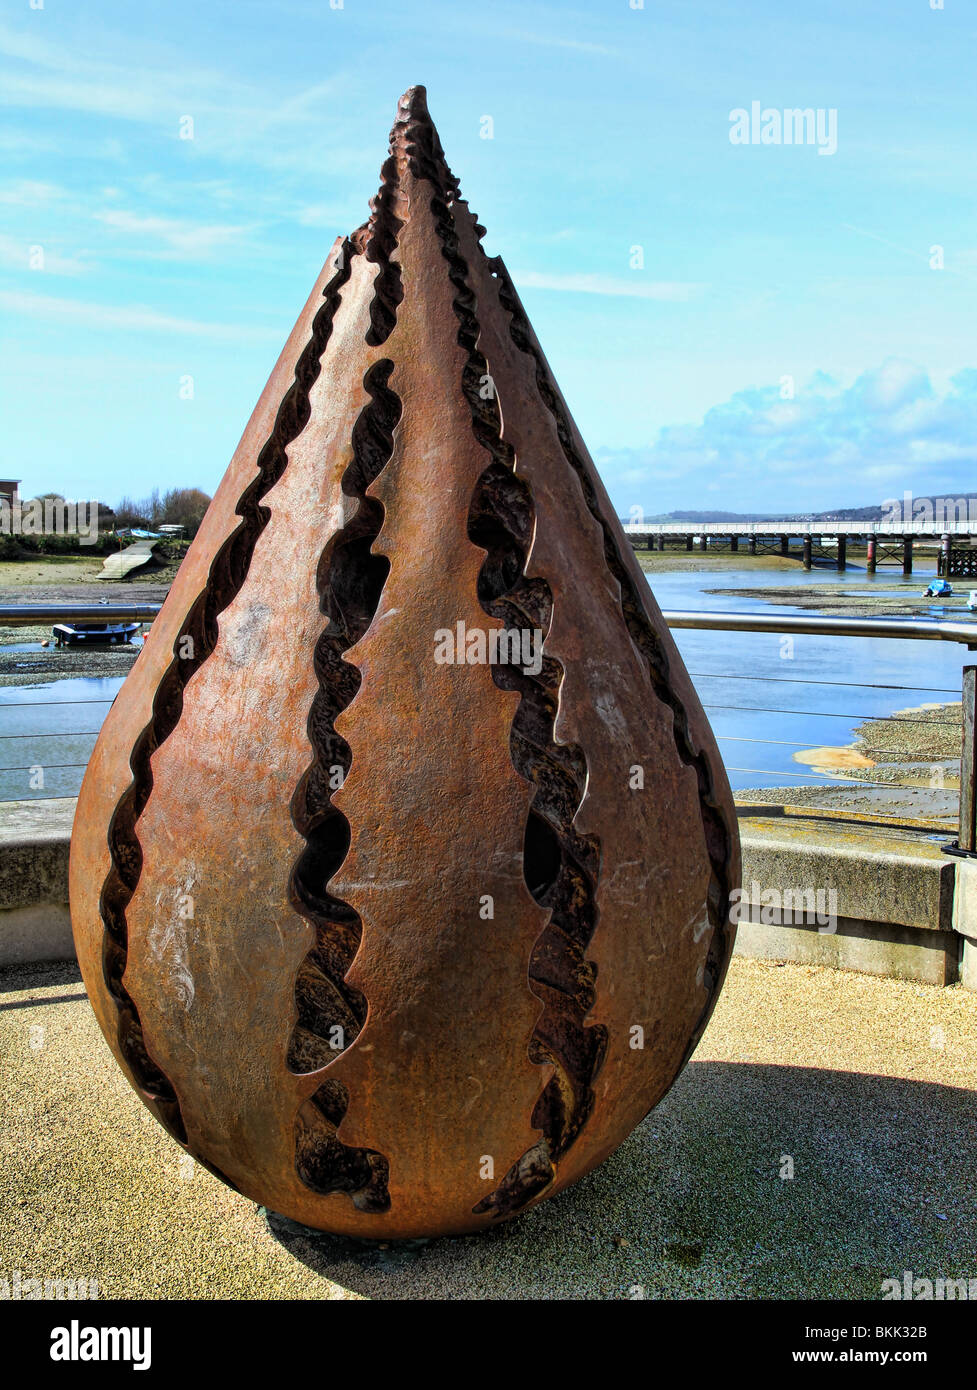 A cone shaped statue at a new residential area at Shoreham beside the river Adur. Stock Photo